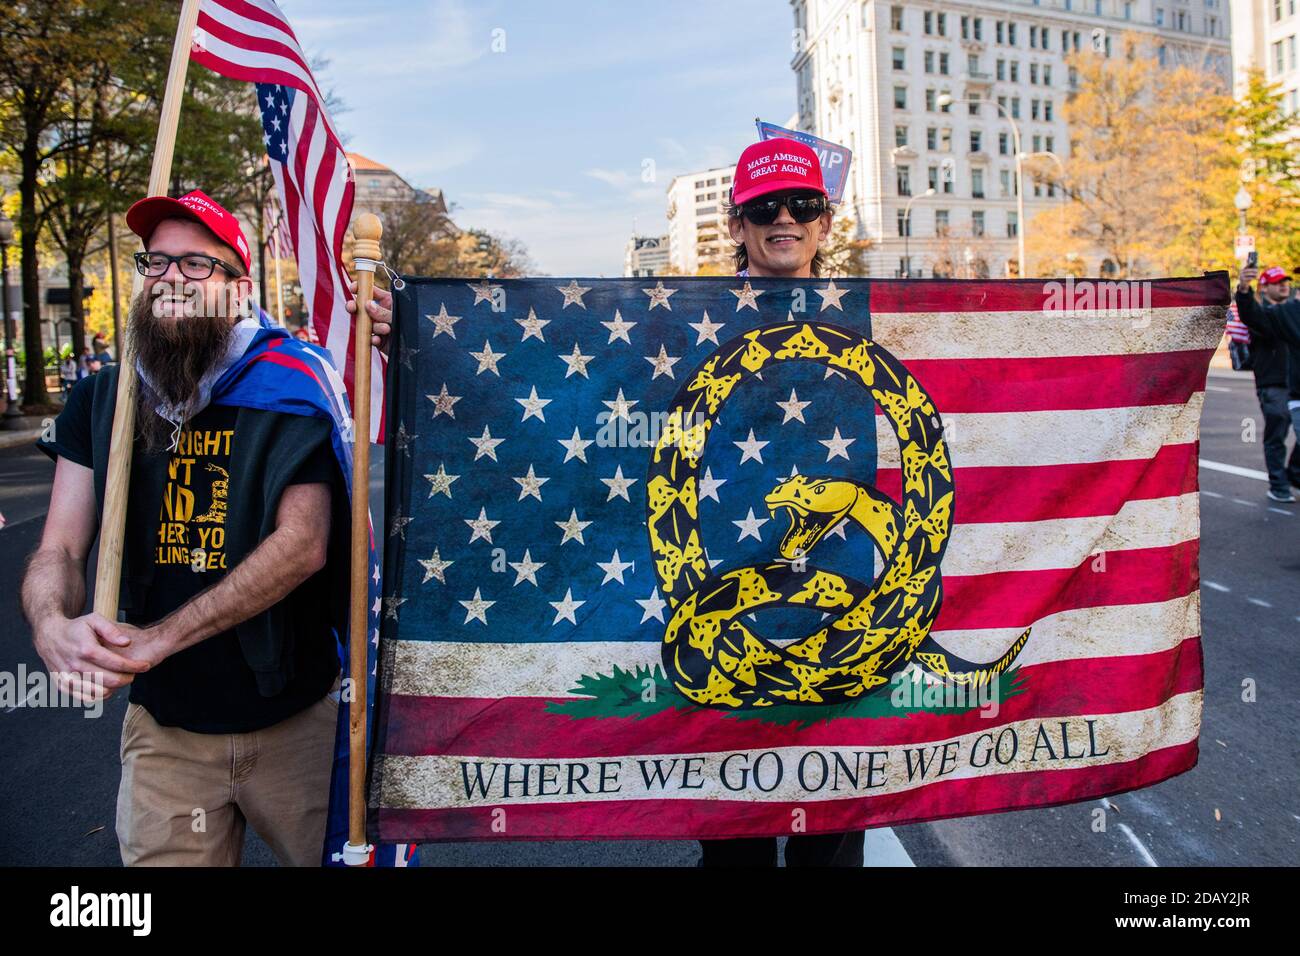 WASHINGTON D.C., NOVEMBER 14- A Qanon supporter marches in route to the Supreme Court during the Million Maga March protest regarding election results on November 14, 2020 in Washington, DC Photo: Chris Tuite/imageSPACE/MediaPunch Stock Photo